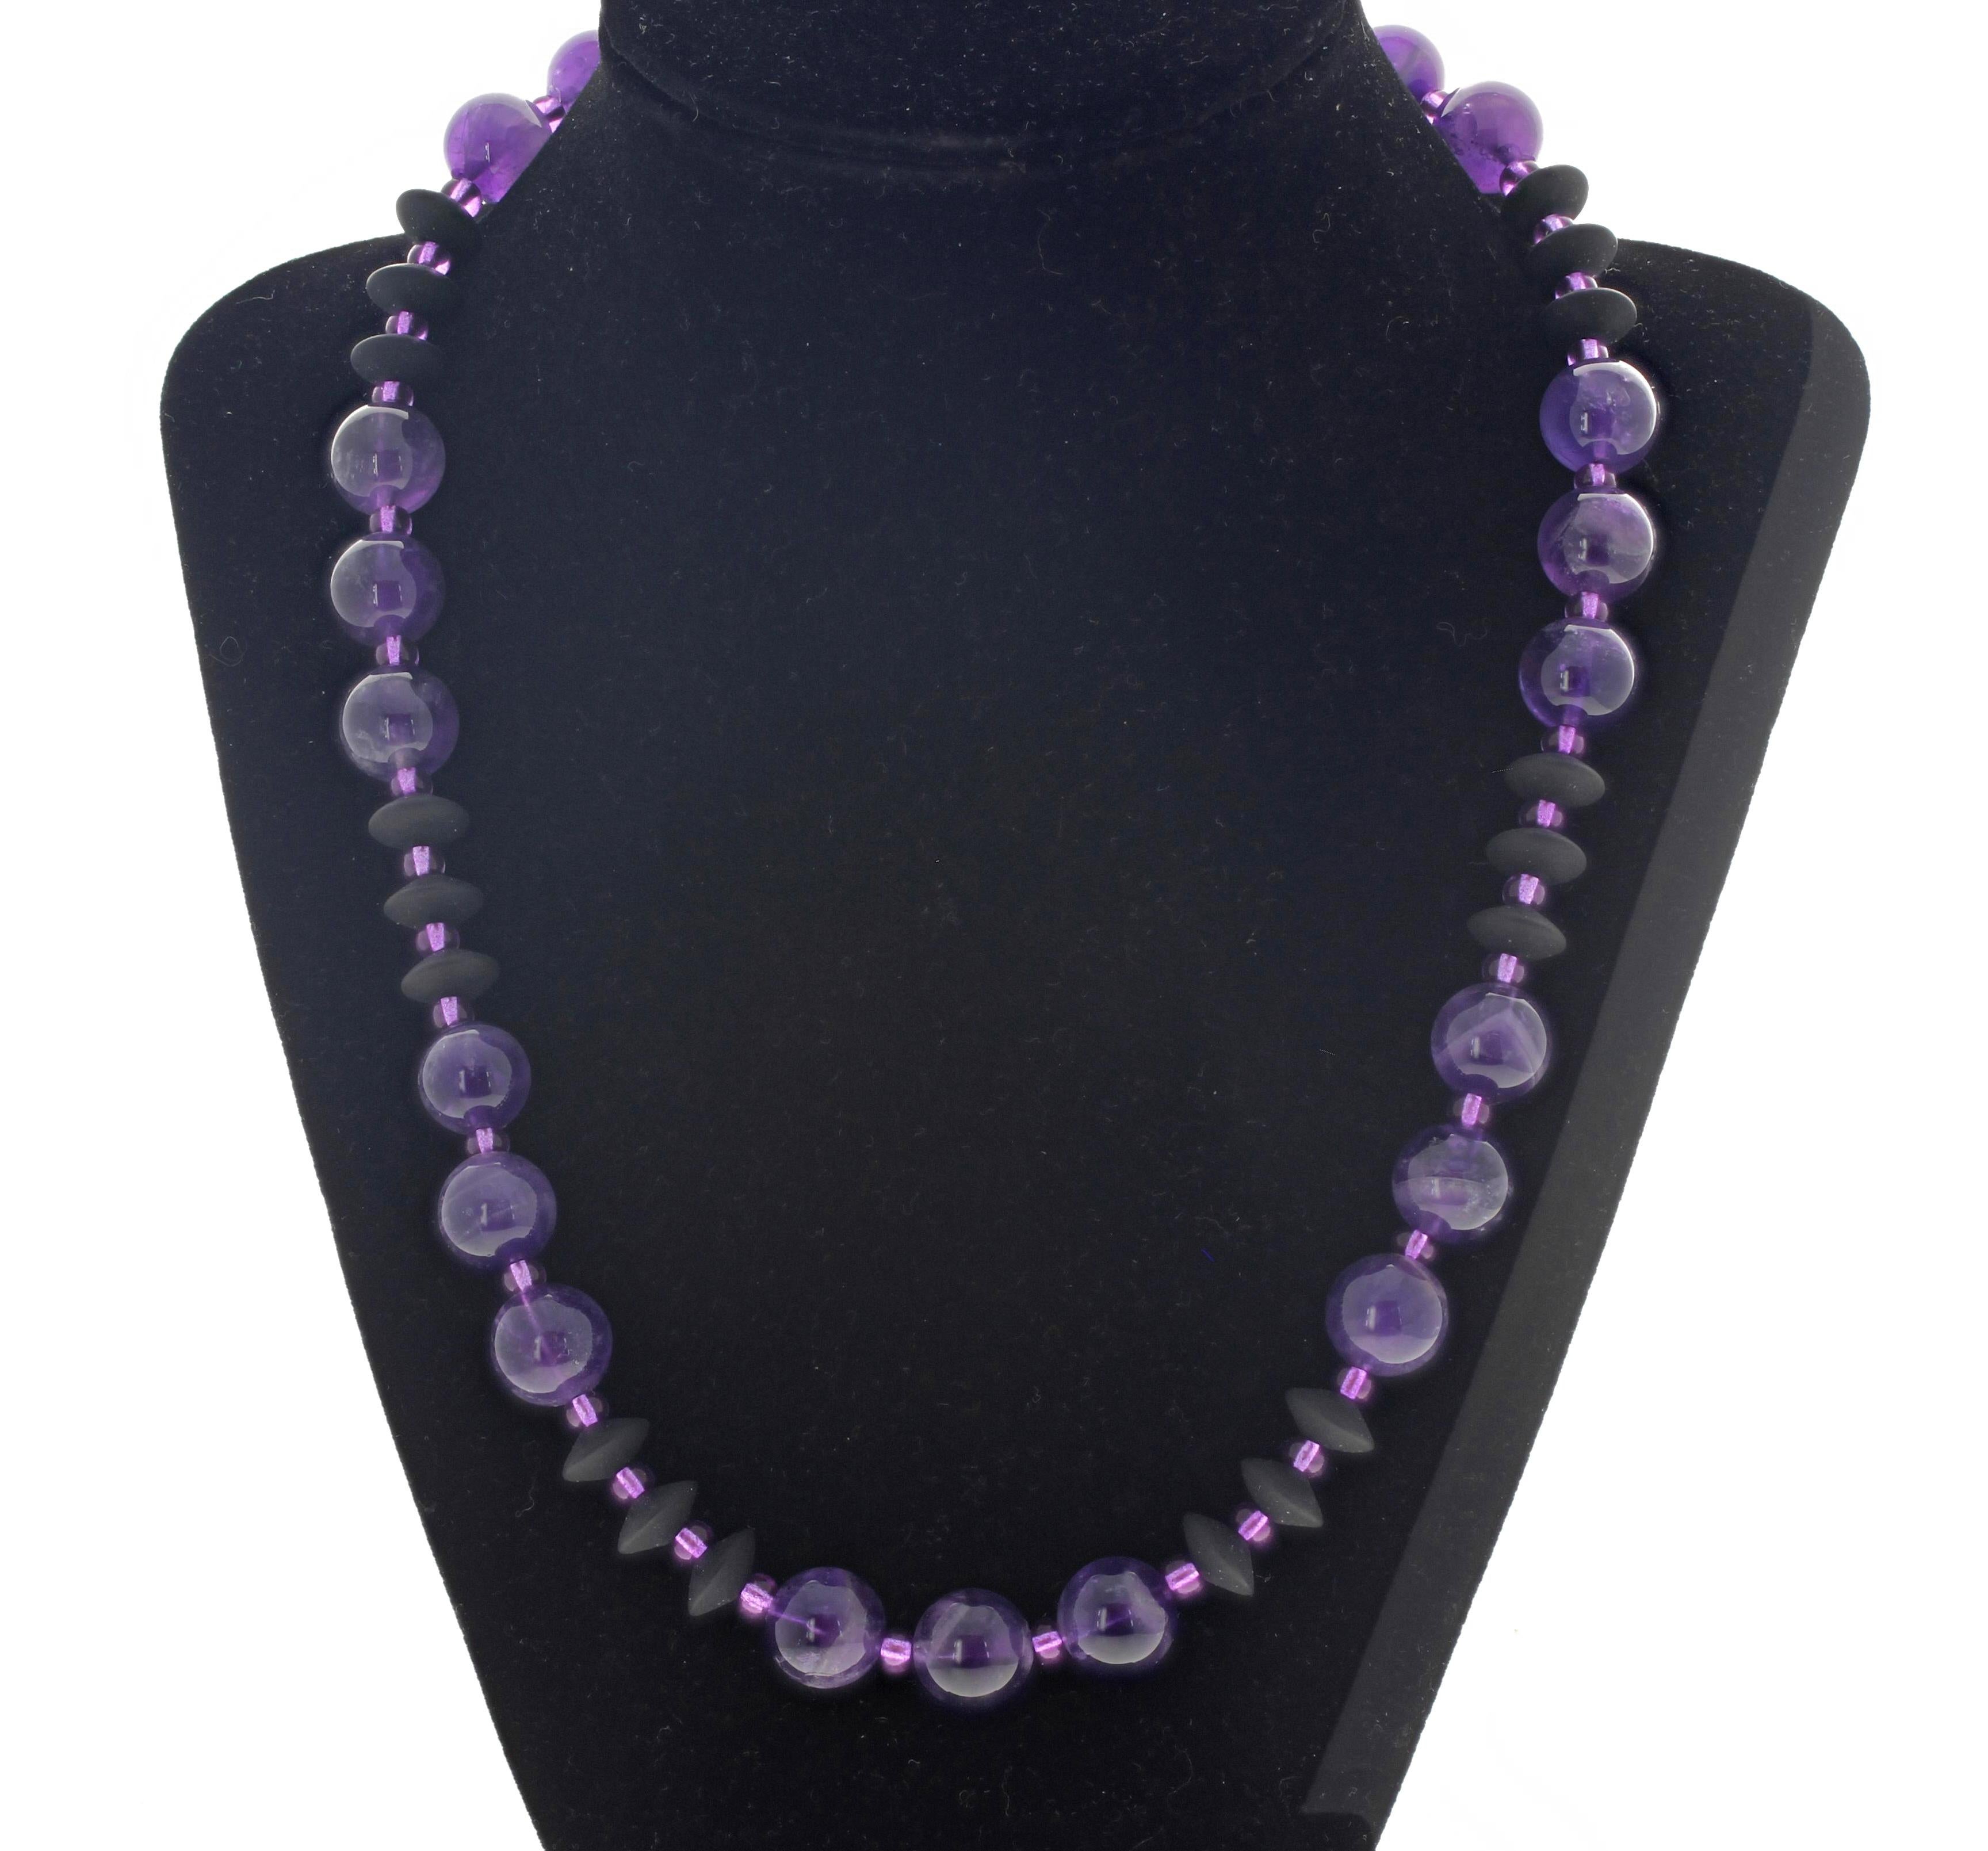 Lovely contrast between these polished Amethyst rocks - approximately 12 mm -  and the Black Onyx enhanced by sparkling glowing Czech purplypink beads.   This bright happy necklace is 20 inches long and has a gold plated hook clasp.  